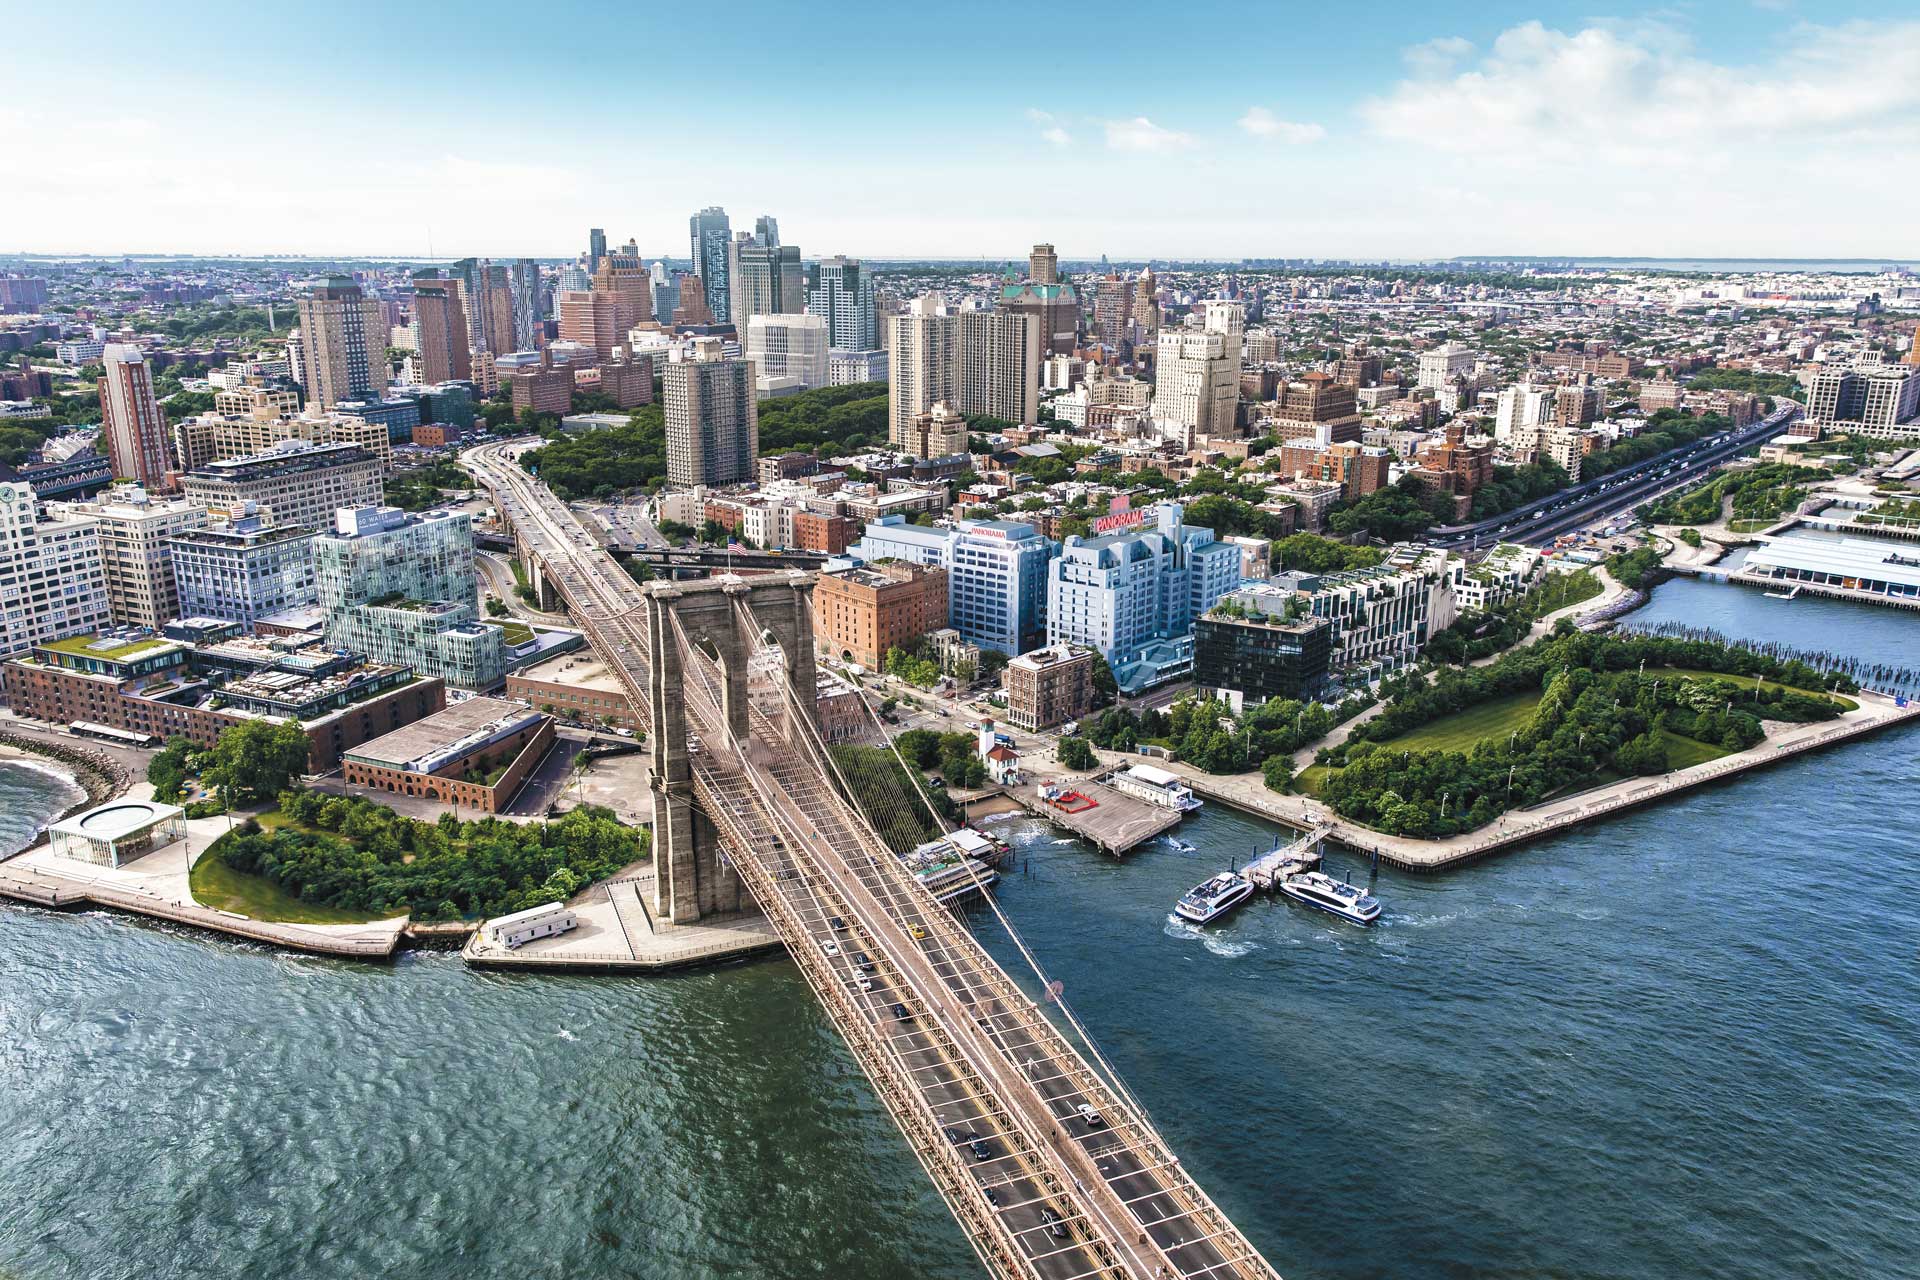 https://panoramabrooklyn.com/images/04-Panorama-View_From_Manhattan-R07-HR.jpg